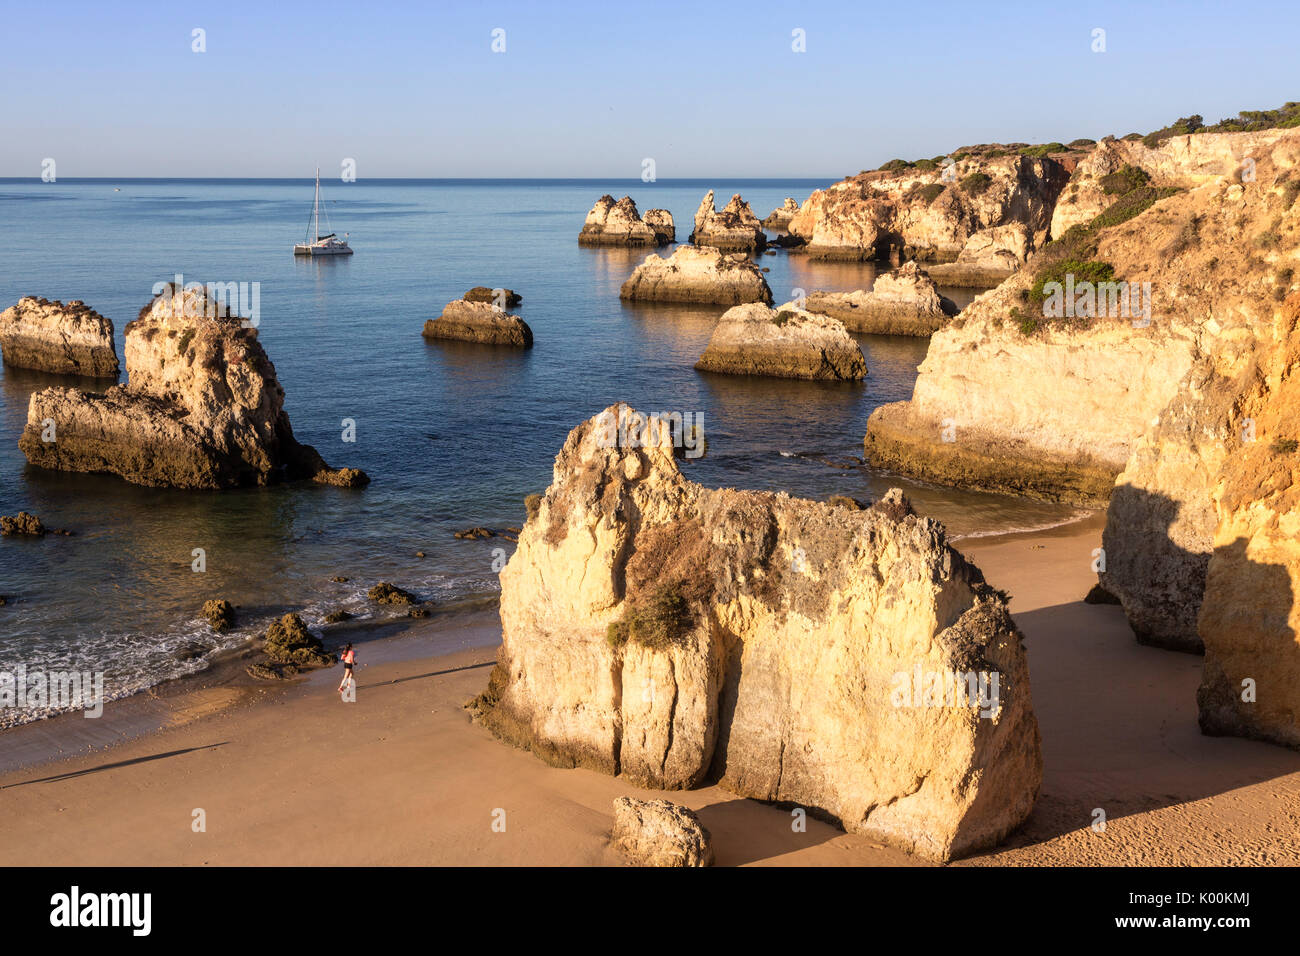 Runner on the fine sandy beach bathed by the blue ocean at dawn Praia do Alemao Portimao Faro district Algarve Portugal Europe Stock Photo